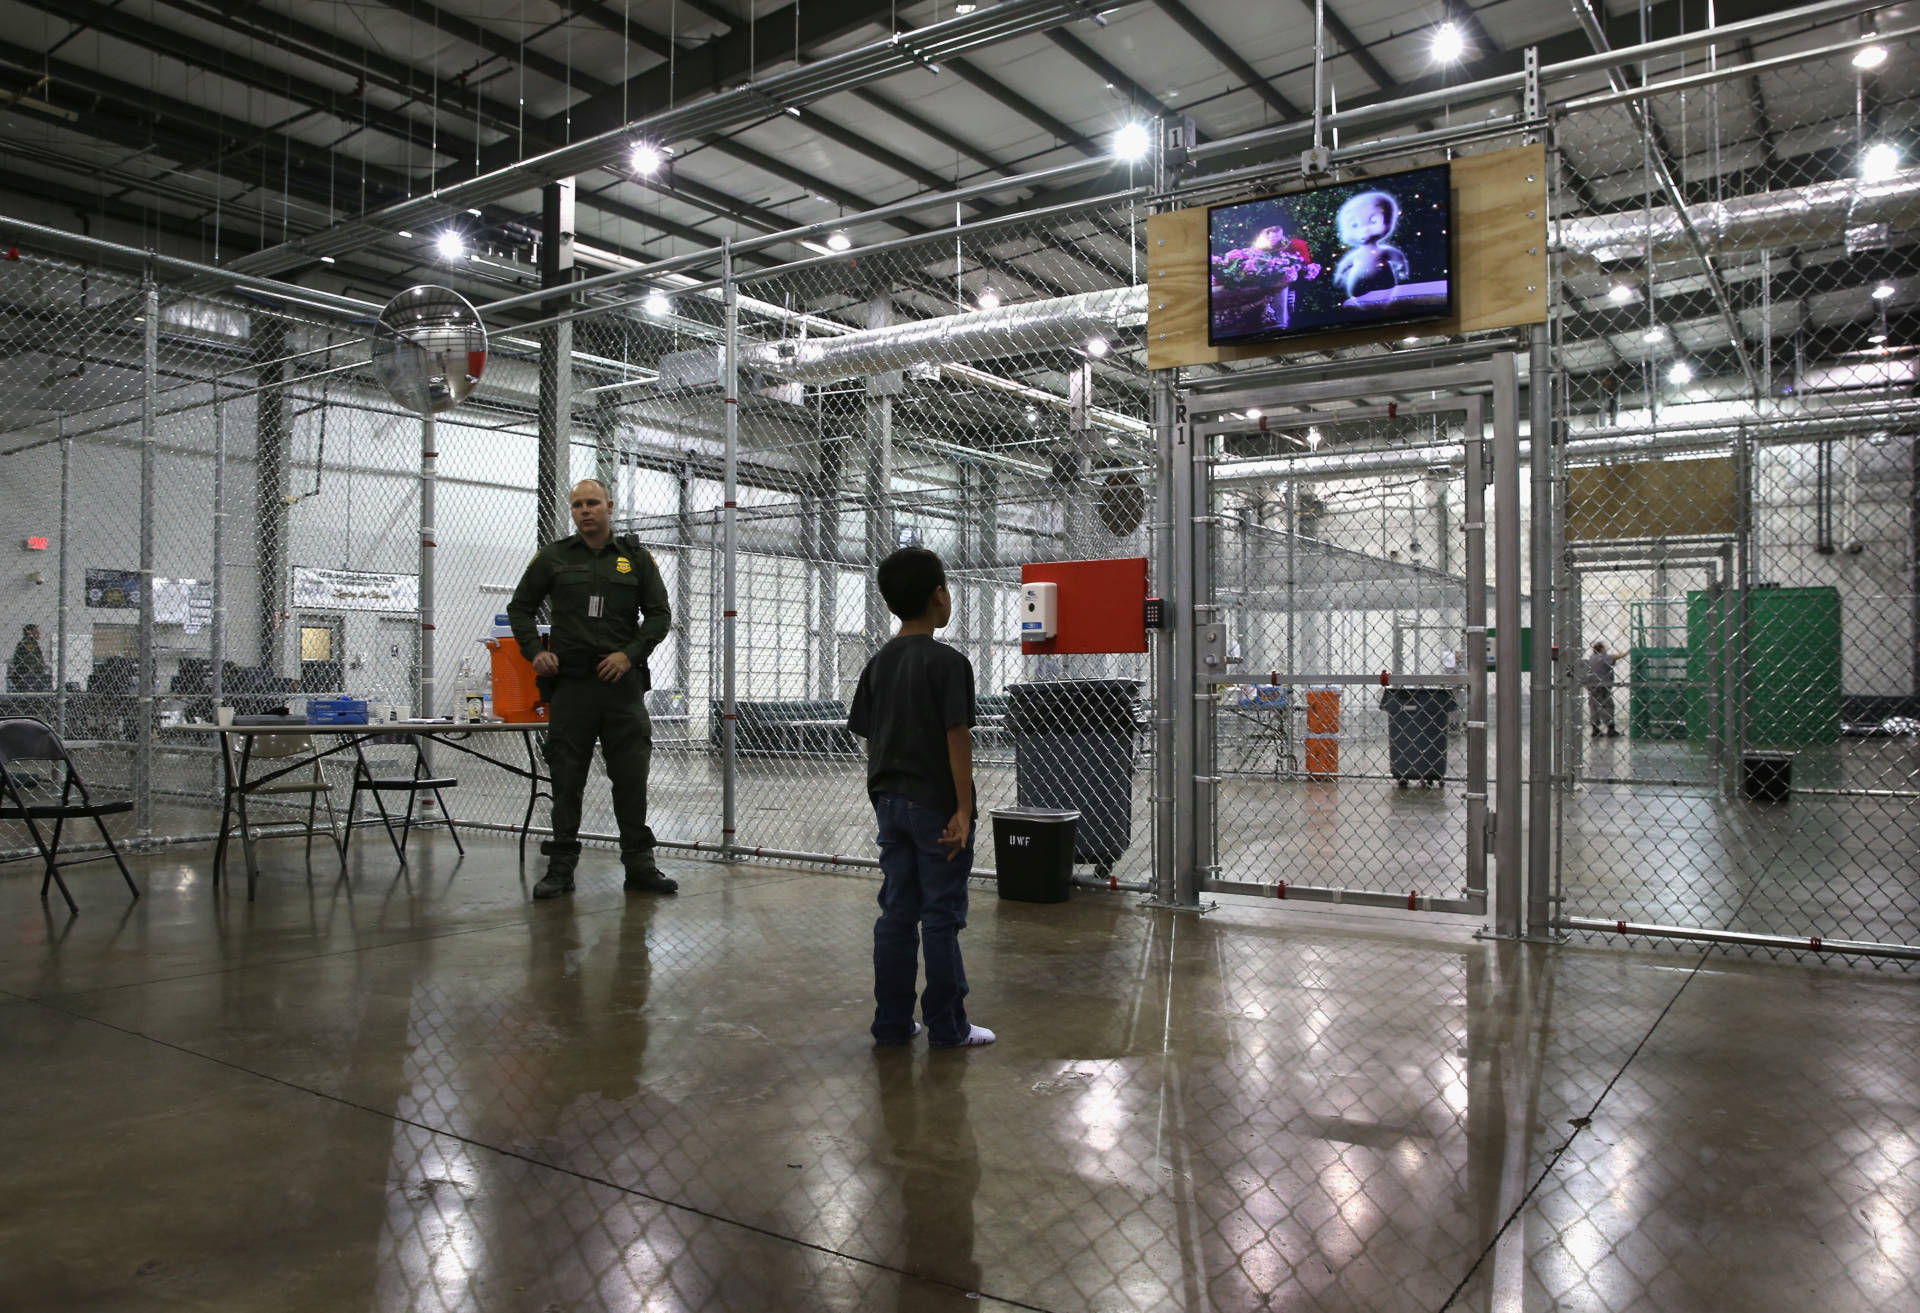 A boy from Honduras watches a movie at a detention facility run by the U.S. Border Patrol on September 8, 2014 in McAllen, Texas.  John Moore/Getty Images